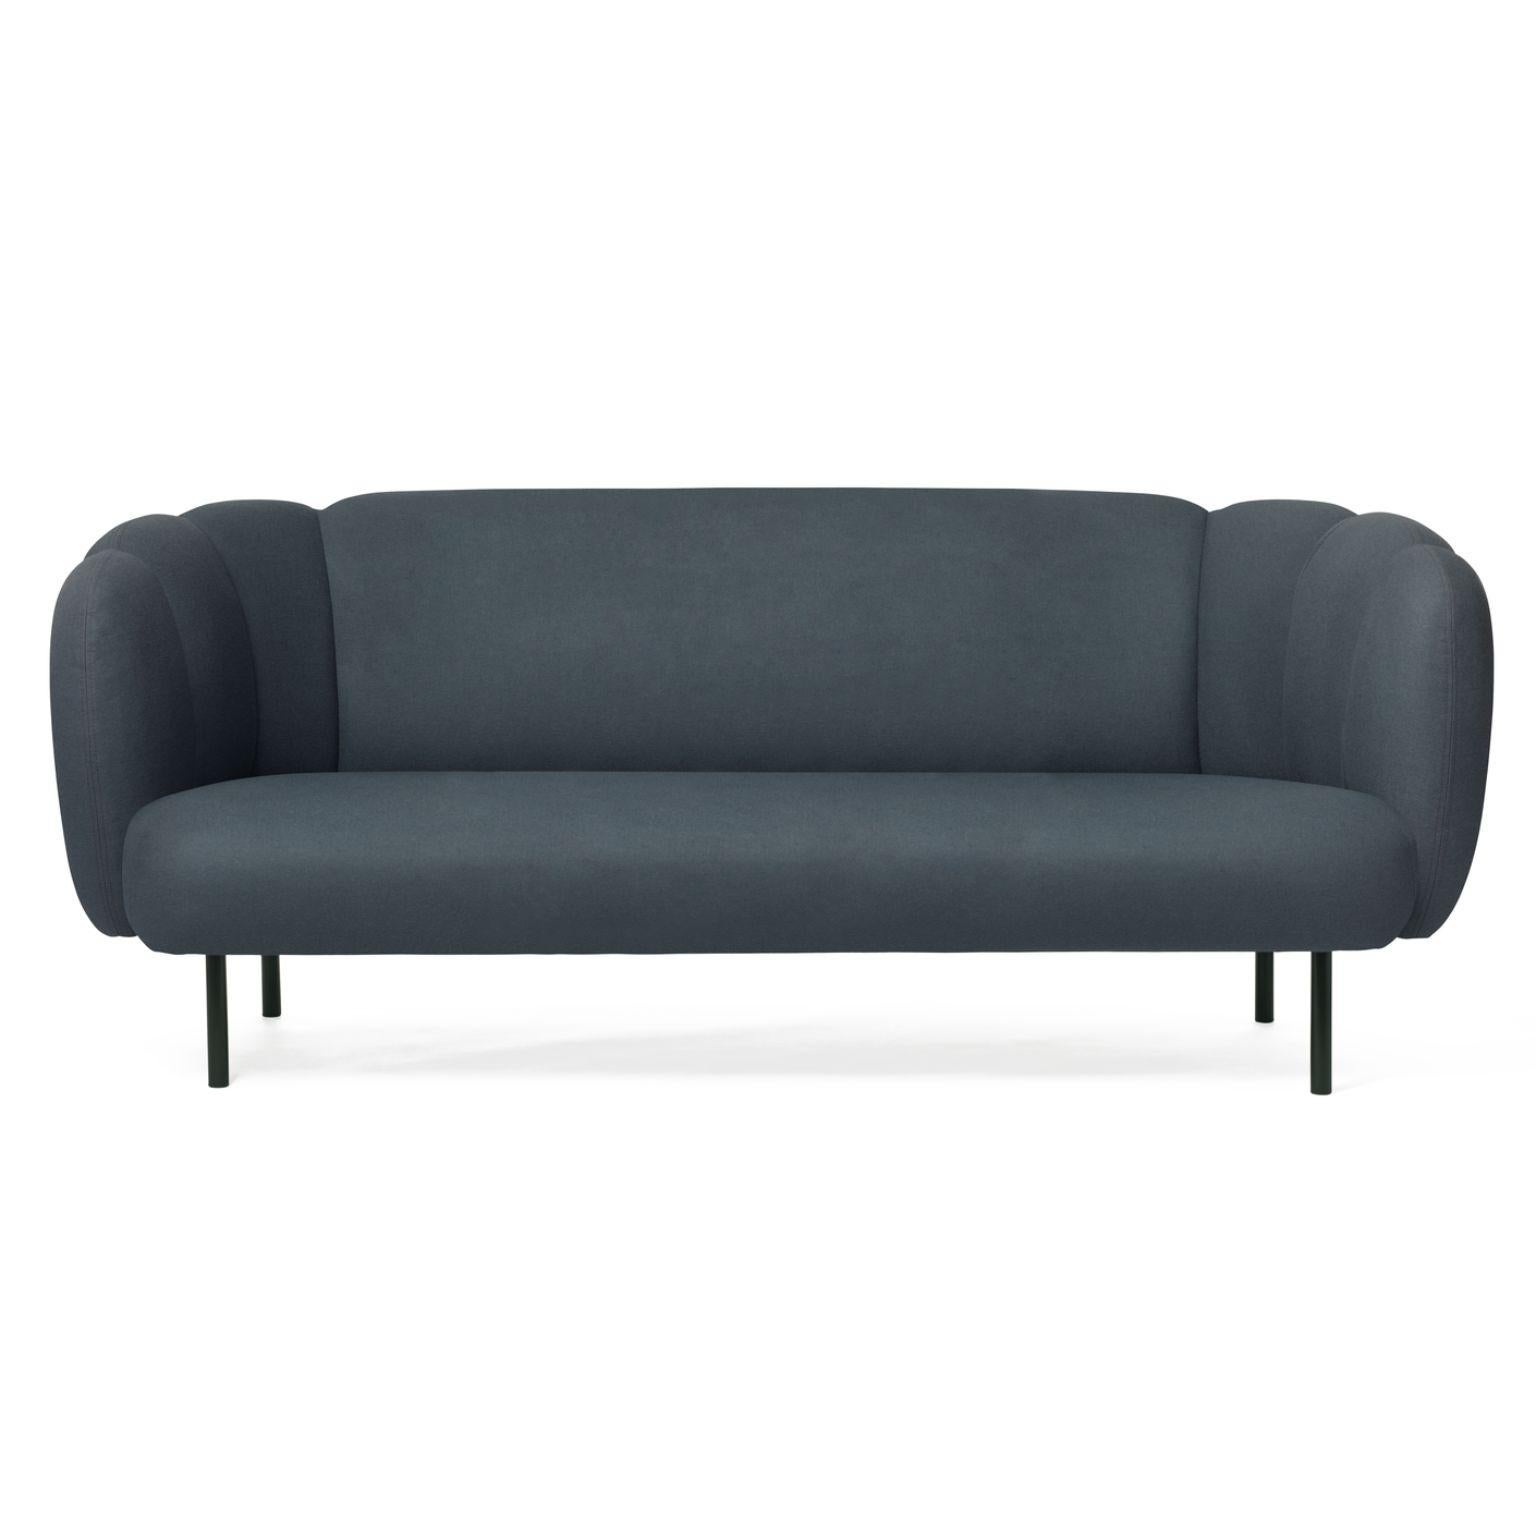 Caper 3 seater with stitches petrol by Warm Nordic.
Dimensions: D200 x W84 x H 80 cm.
Material: textile upholstery, wooden frame, powder coated black steel legs.
Weight: 55.5 kg
Also available in different colours and finishes. 

An elegant